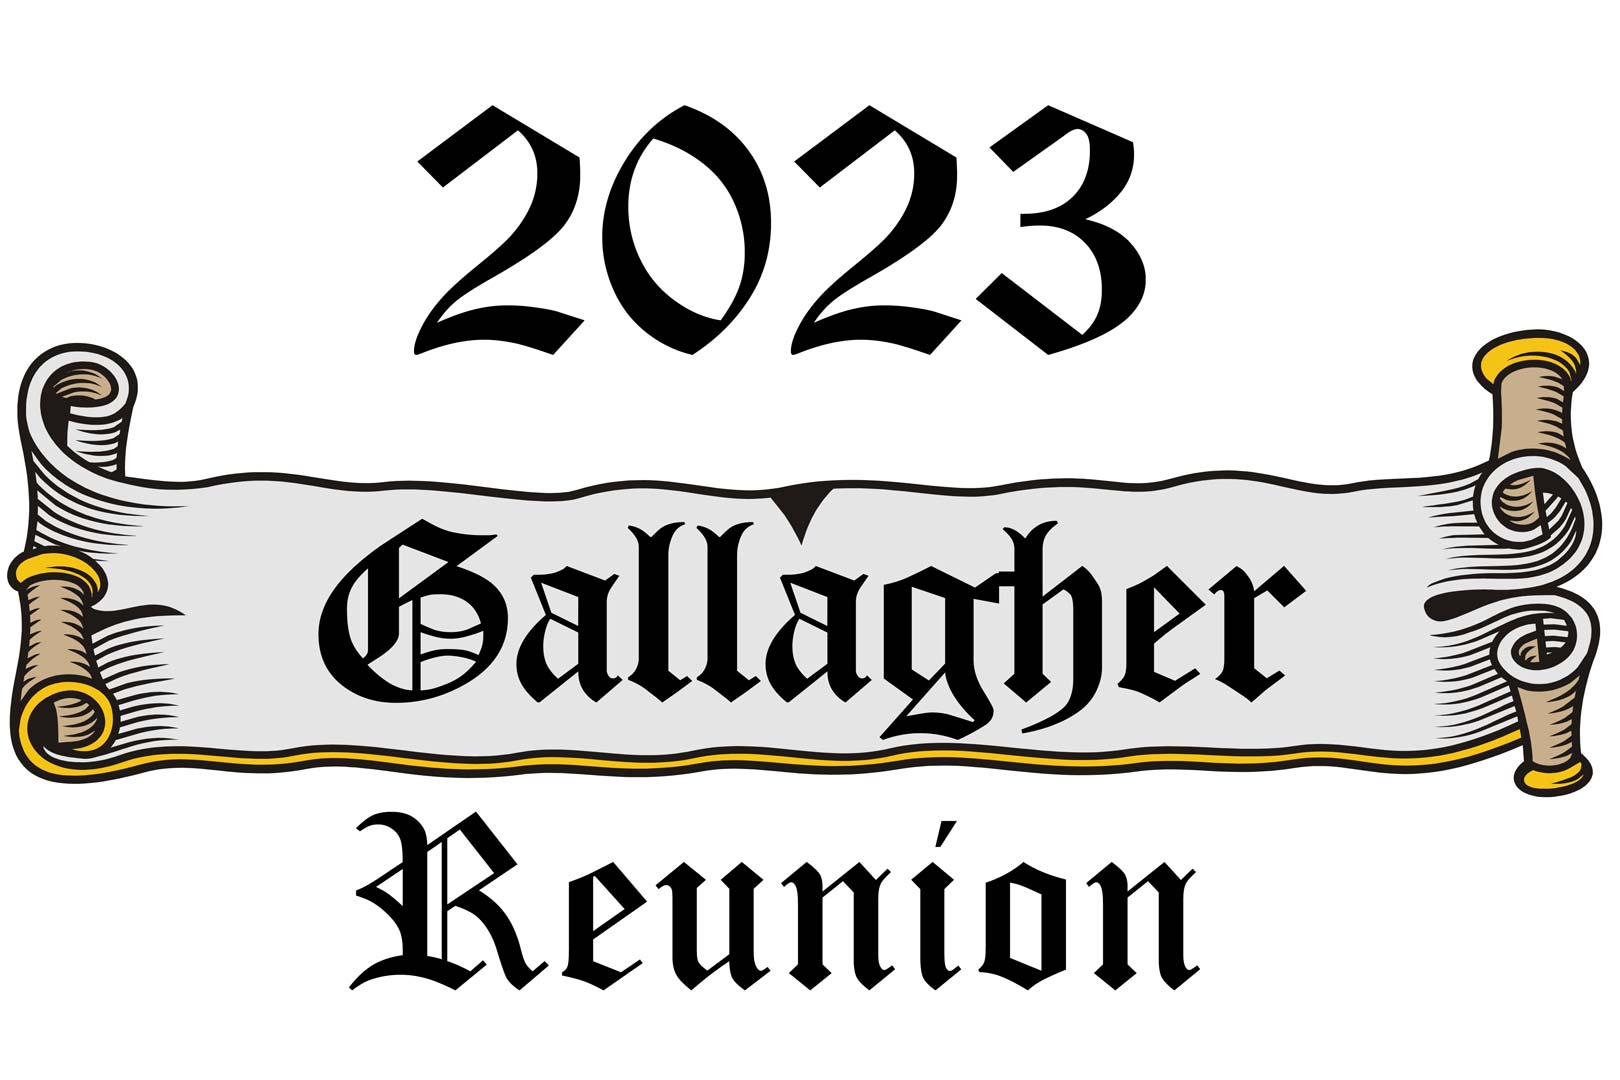 Gallagher reunion for 2023